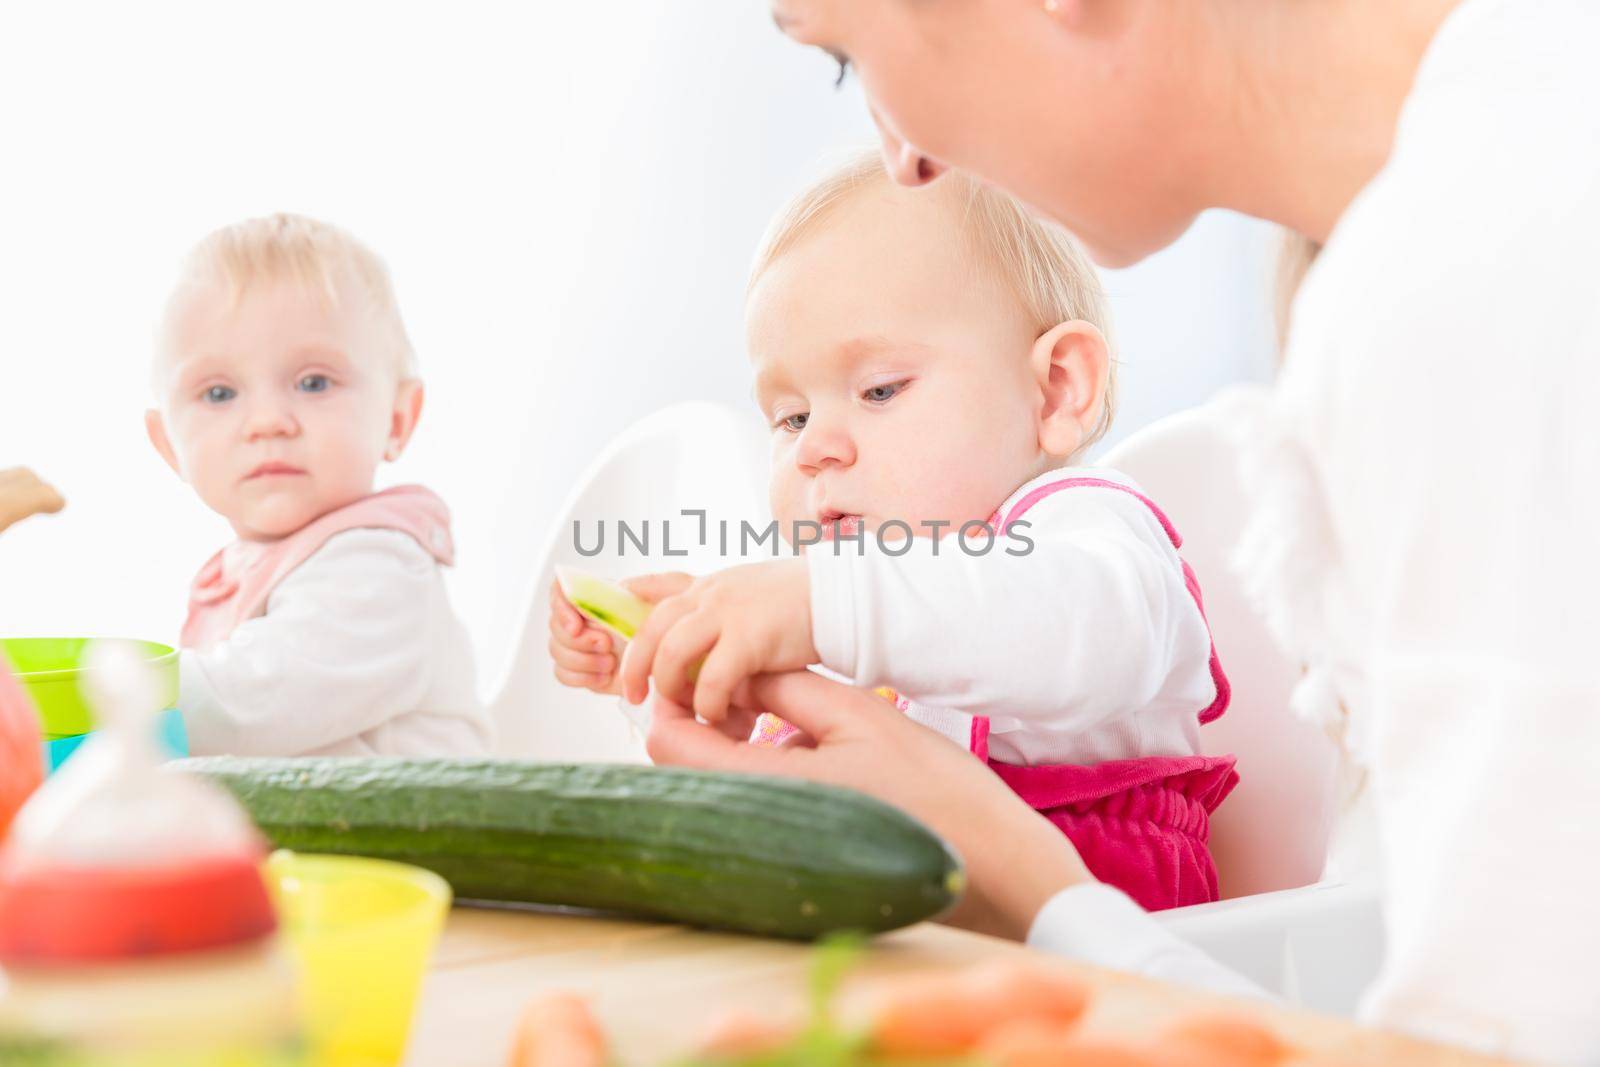 Portrait of a cute baby girl with blue eyes eating healthy solid food, while sitting in a high chair next to another baby in a modern daycare center for babies